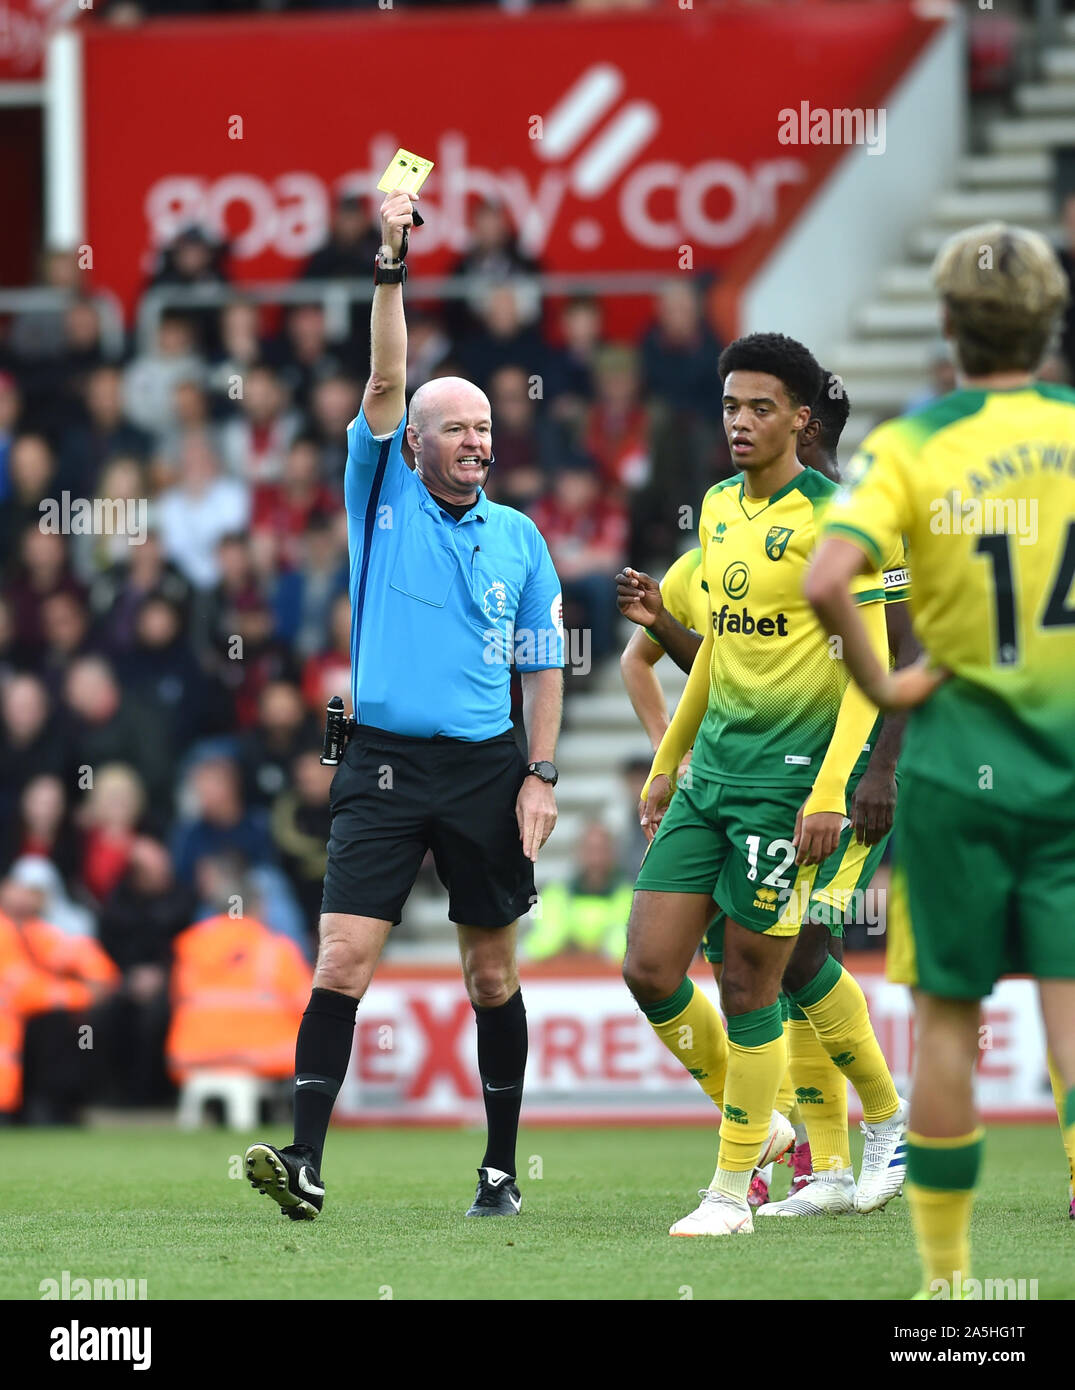 Referee Lee Morris shows Jamal Lewis of Norwich a yellow card during the Premier League match between AFC Bournemouth and Norwich City at the Vitality Stadium Stadium , Bournemouth , 19 October 2019 Photo Simon Dack / Telephoto Images. -  Editorial use only. No merchandising. For Football images FA and Premier League restrictions apply inc. no internet/mobile usage without FAPL license - for details contact Football Dataco Stock Photo